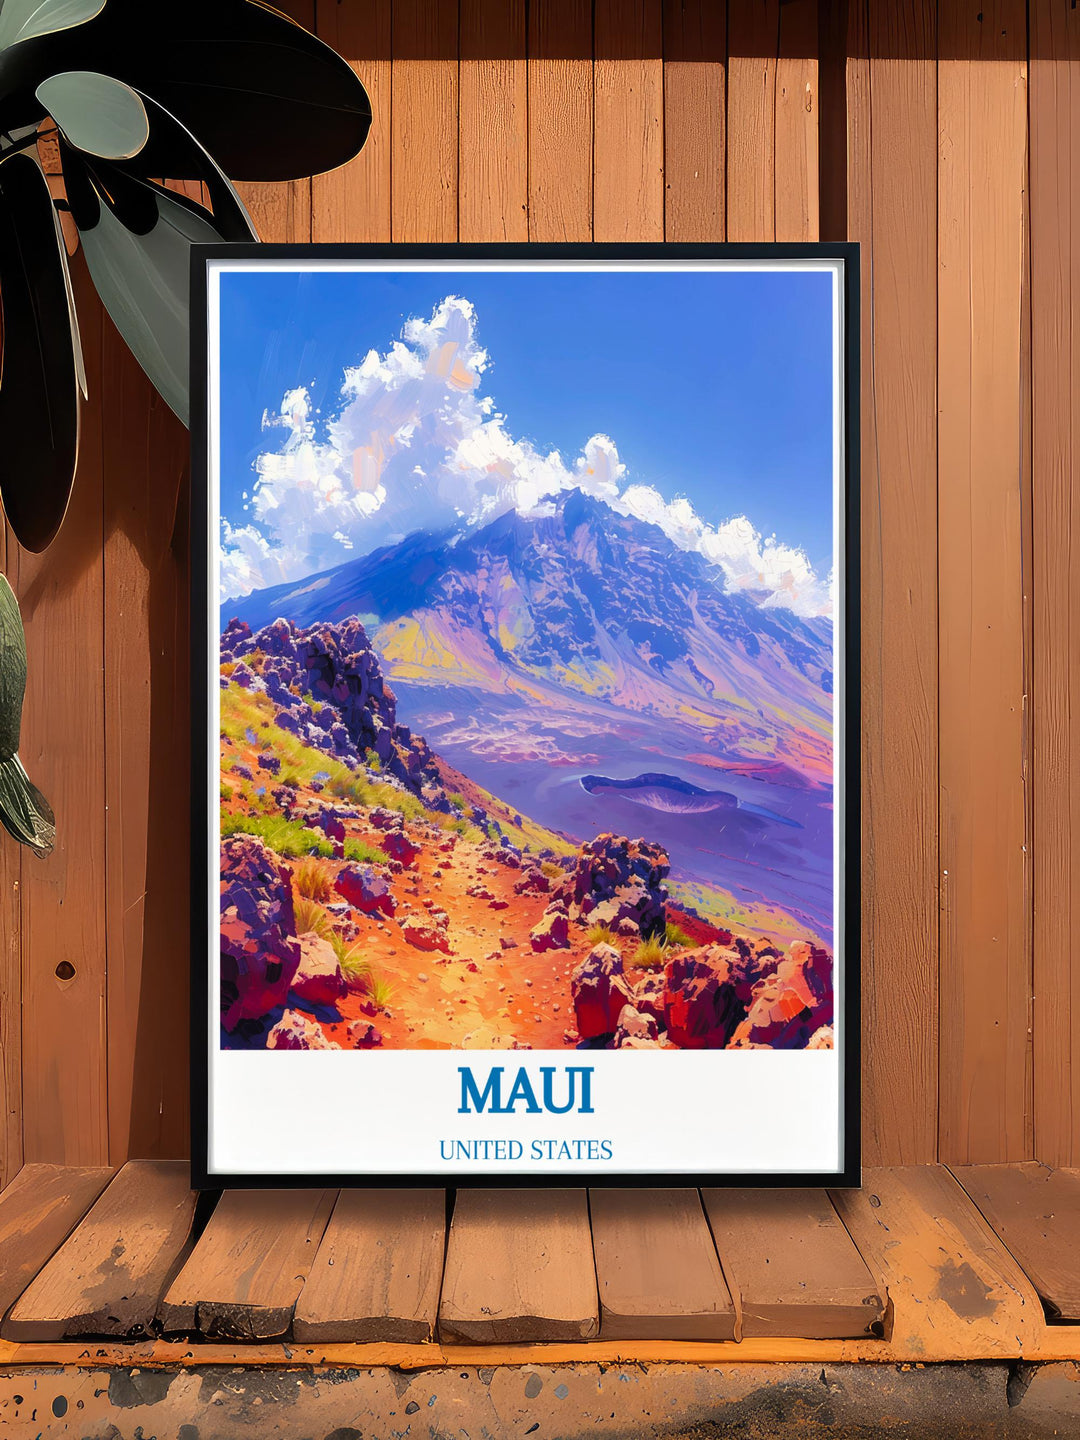 Maui tropical home decor print, ideal for adding a touch of Hawaiian elegance to any rooms aesthetic.